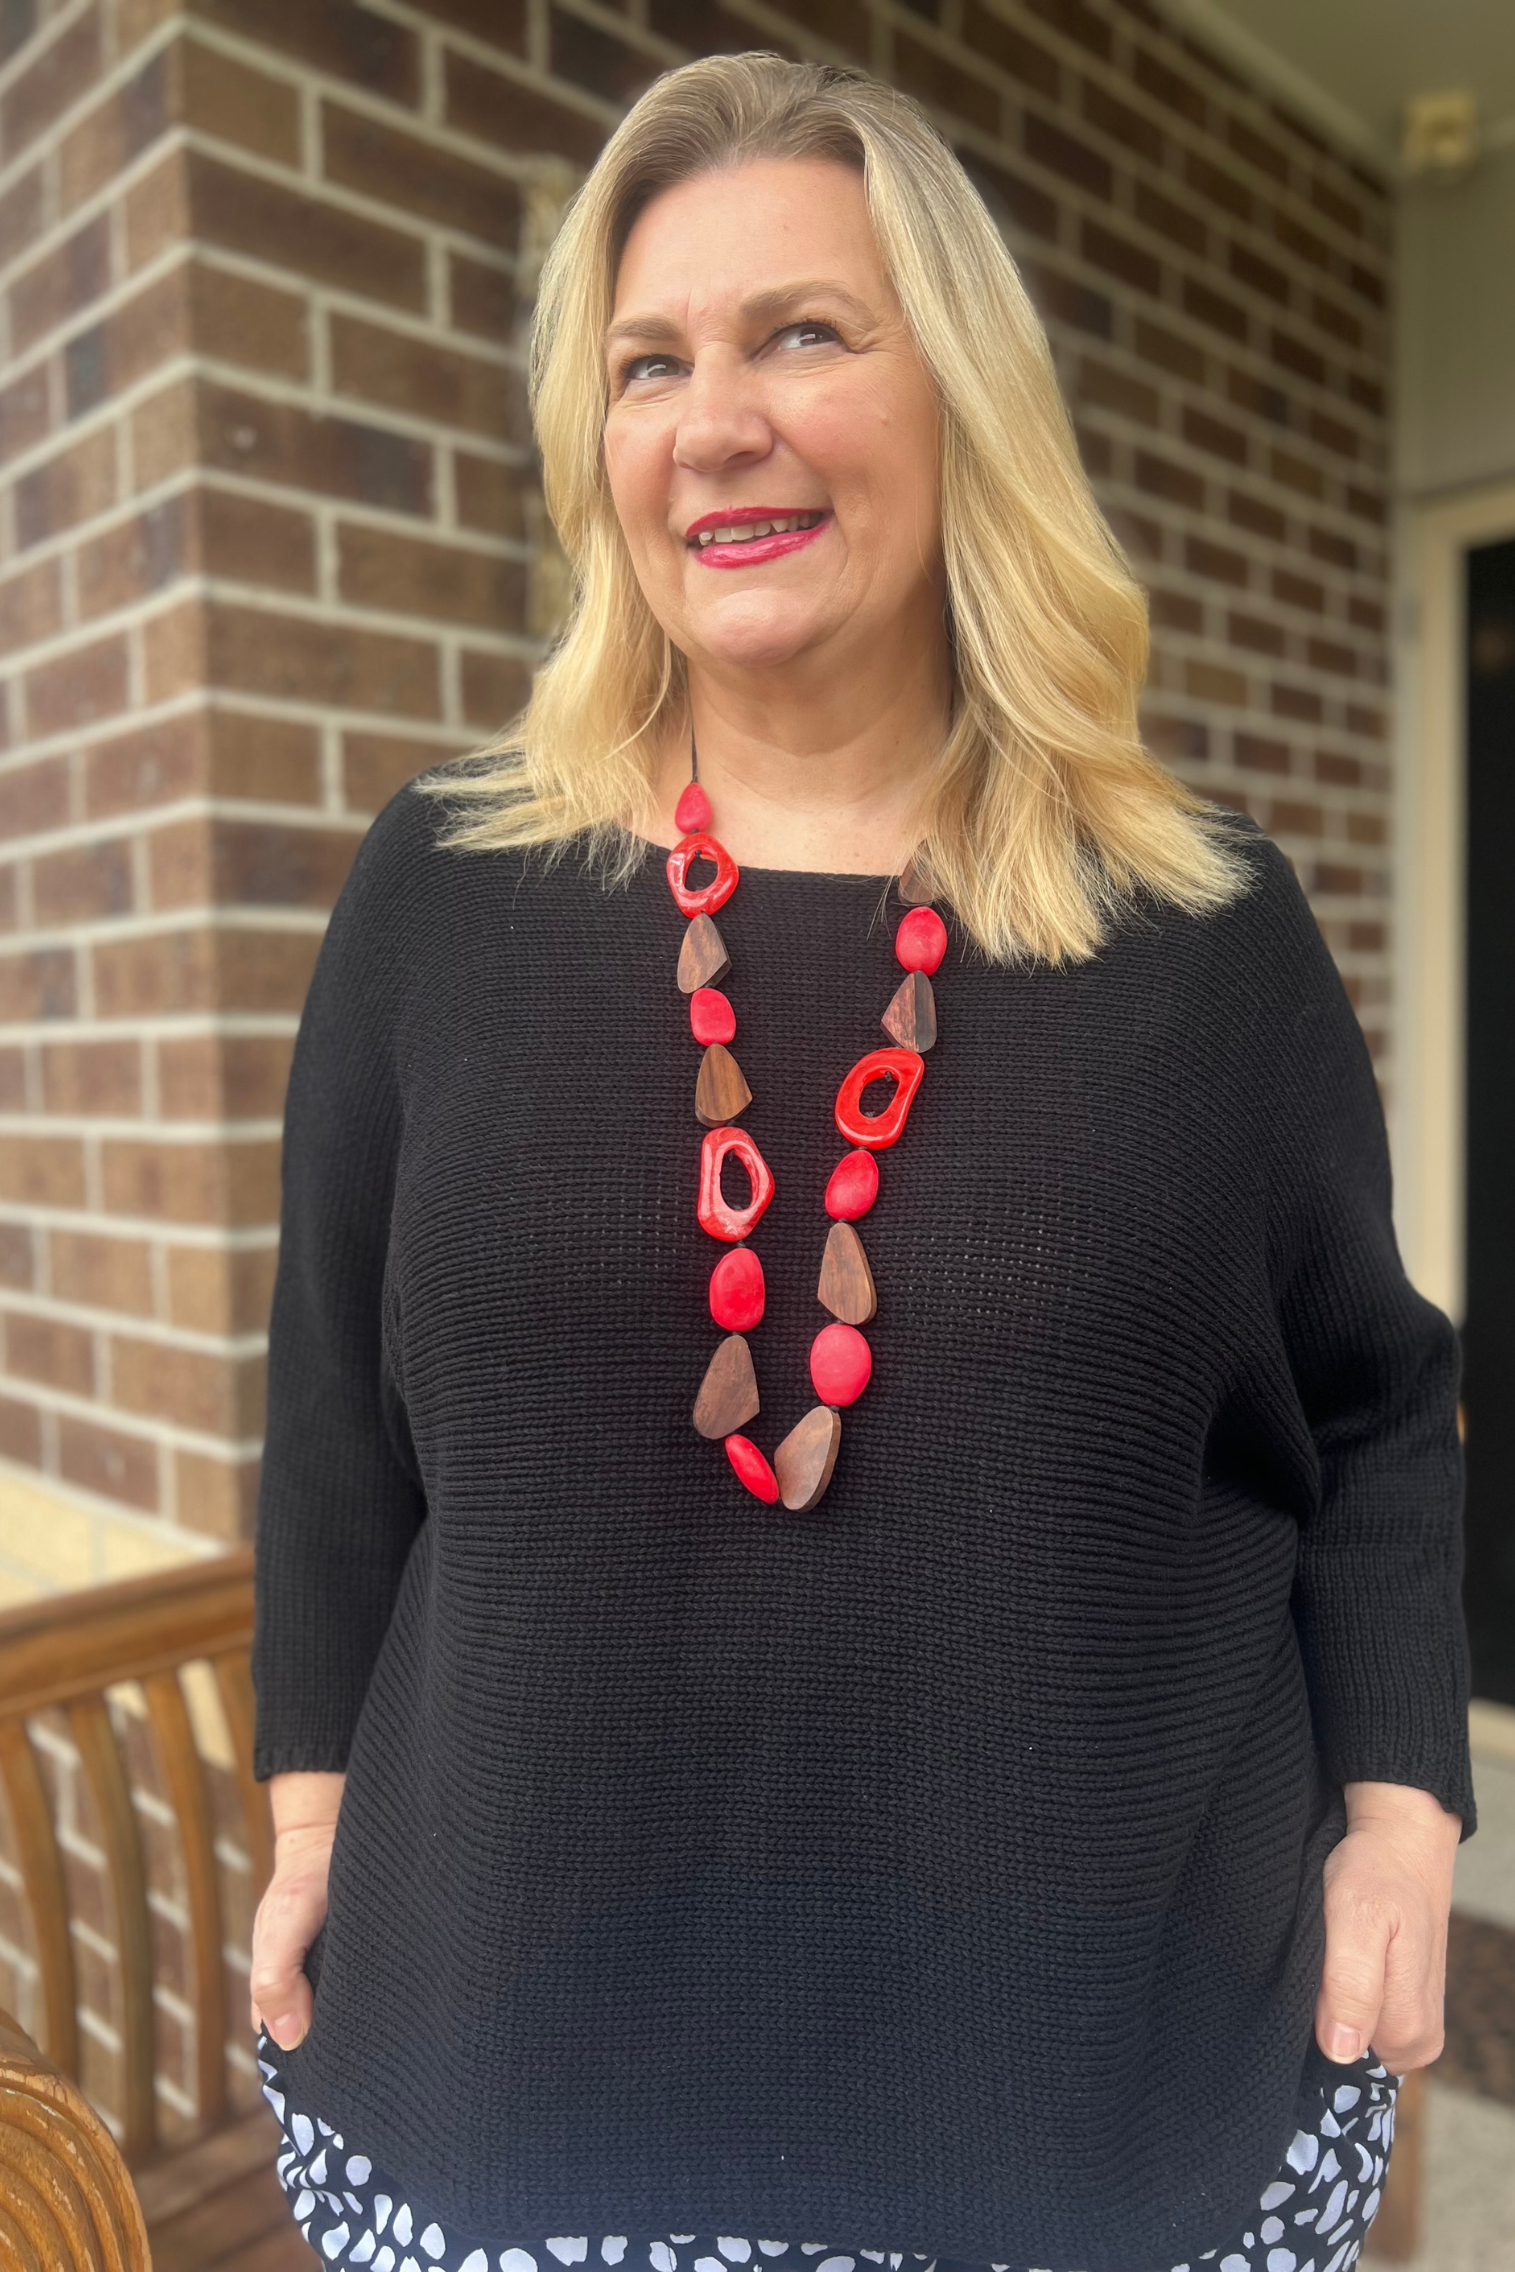 Kita Ku modelling a black boat neck sweater and red necklace on a porch setting. 